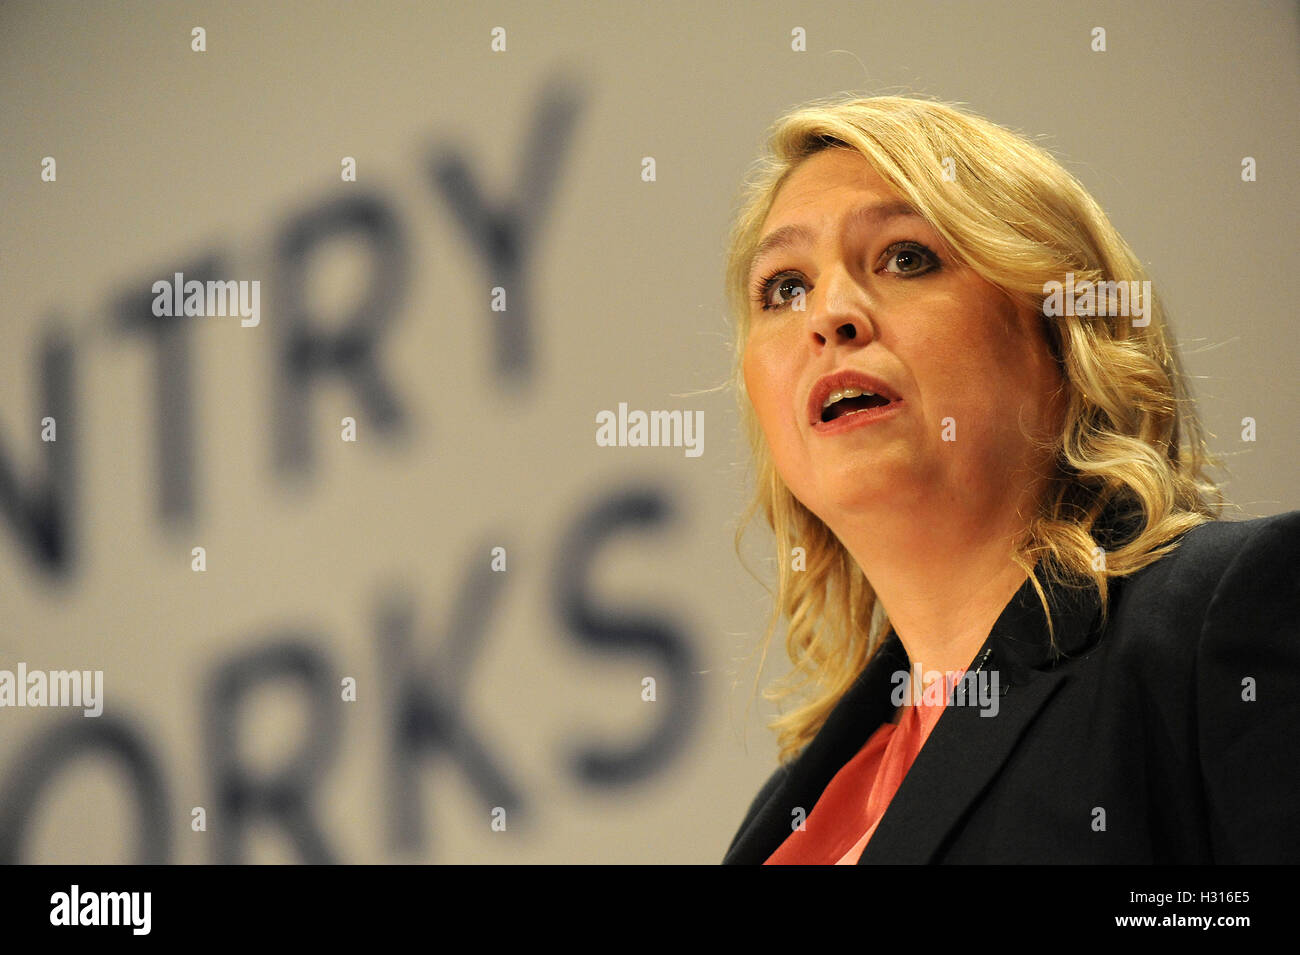 Birmingham, England. 3rd October, 2016.  Karen Bradley, Secretary of State for Culture, Media and Sport, delivers her speech to conference, on the second day of the Conservative Party Conference at the ICC Birmingham. The theme of the speech was 'An Economy that Works for Everyone'. This conference follows the referendum decision for the UK to leave the European Union, and the subsequent election of Theresa May as  leader of the Conservative Party. Kevin Hayes/Alamy Live News Stock Photo